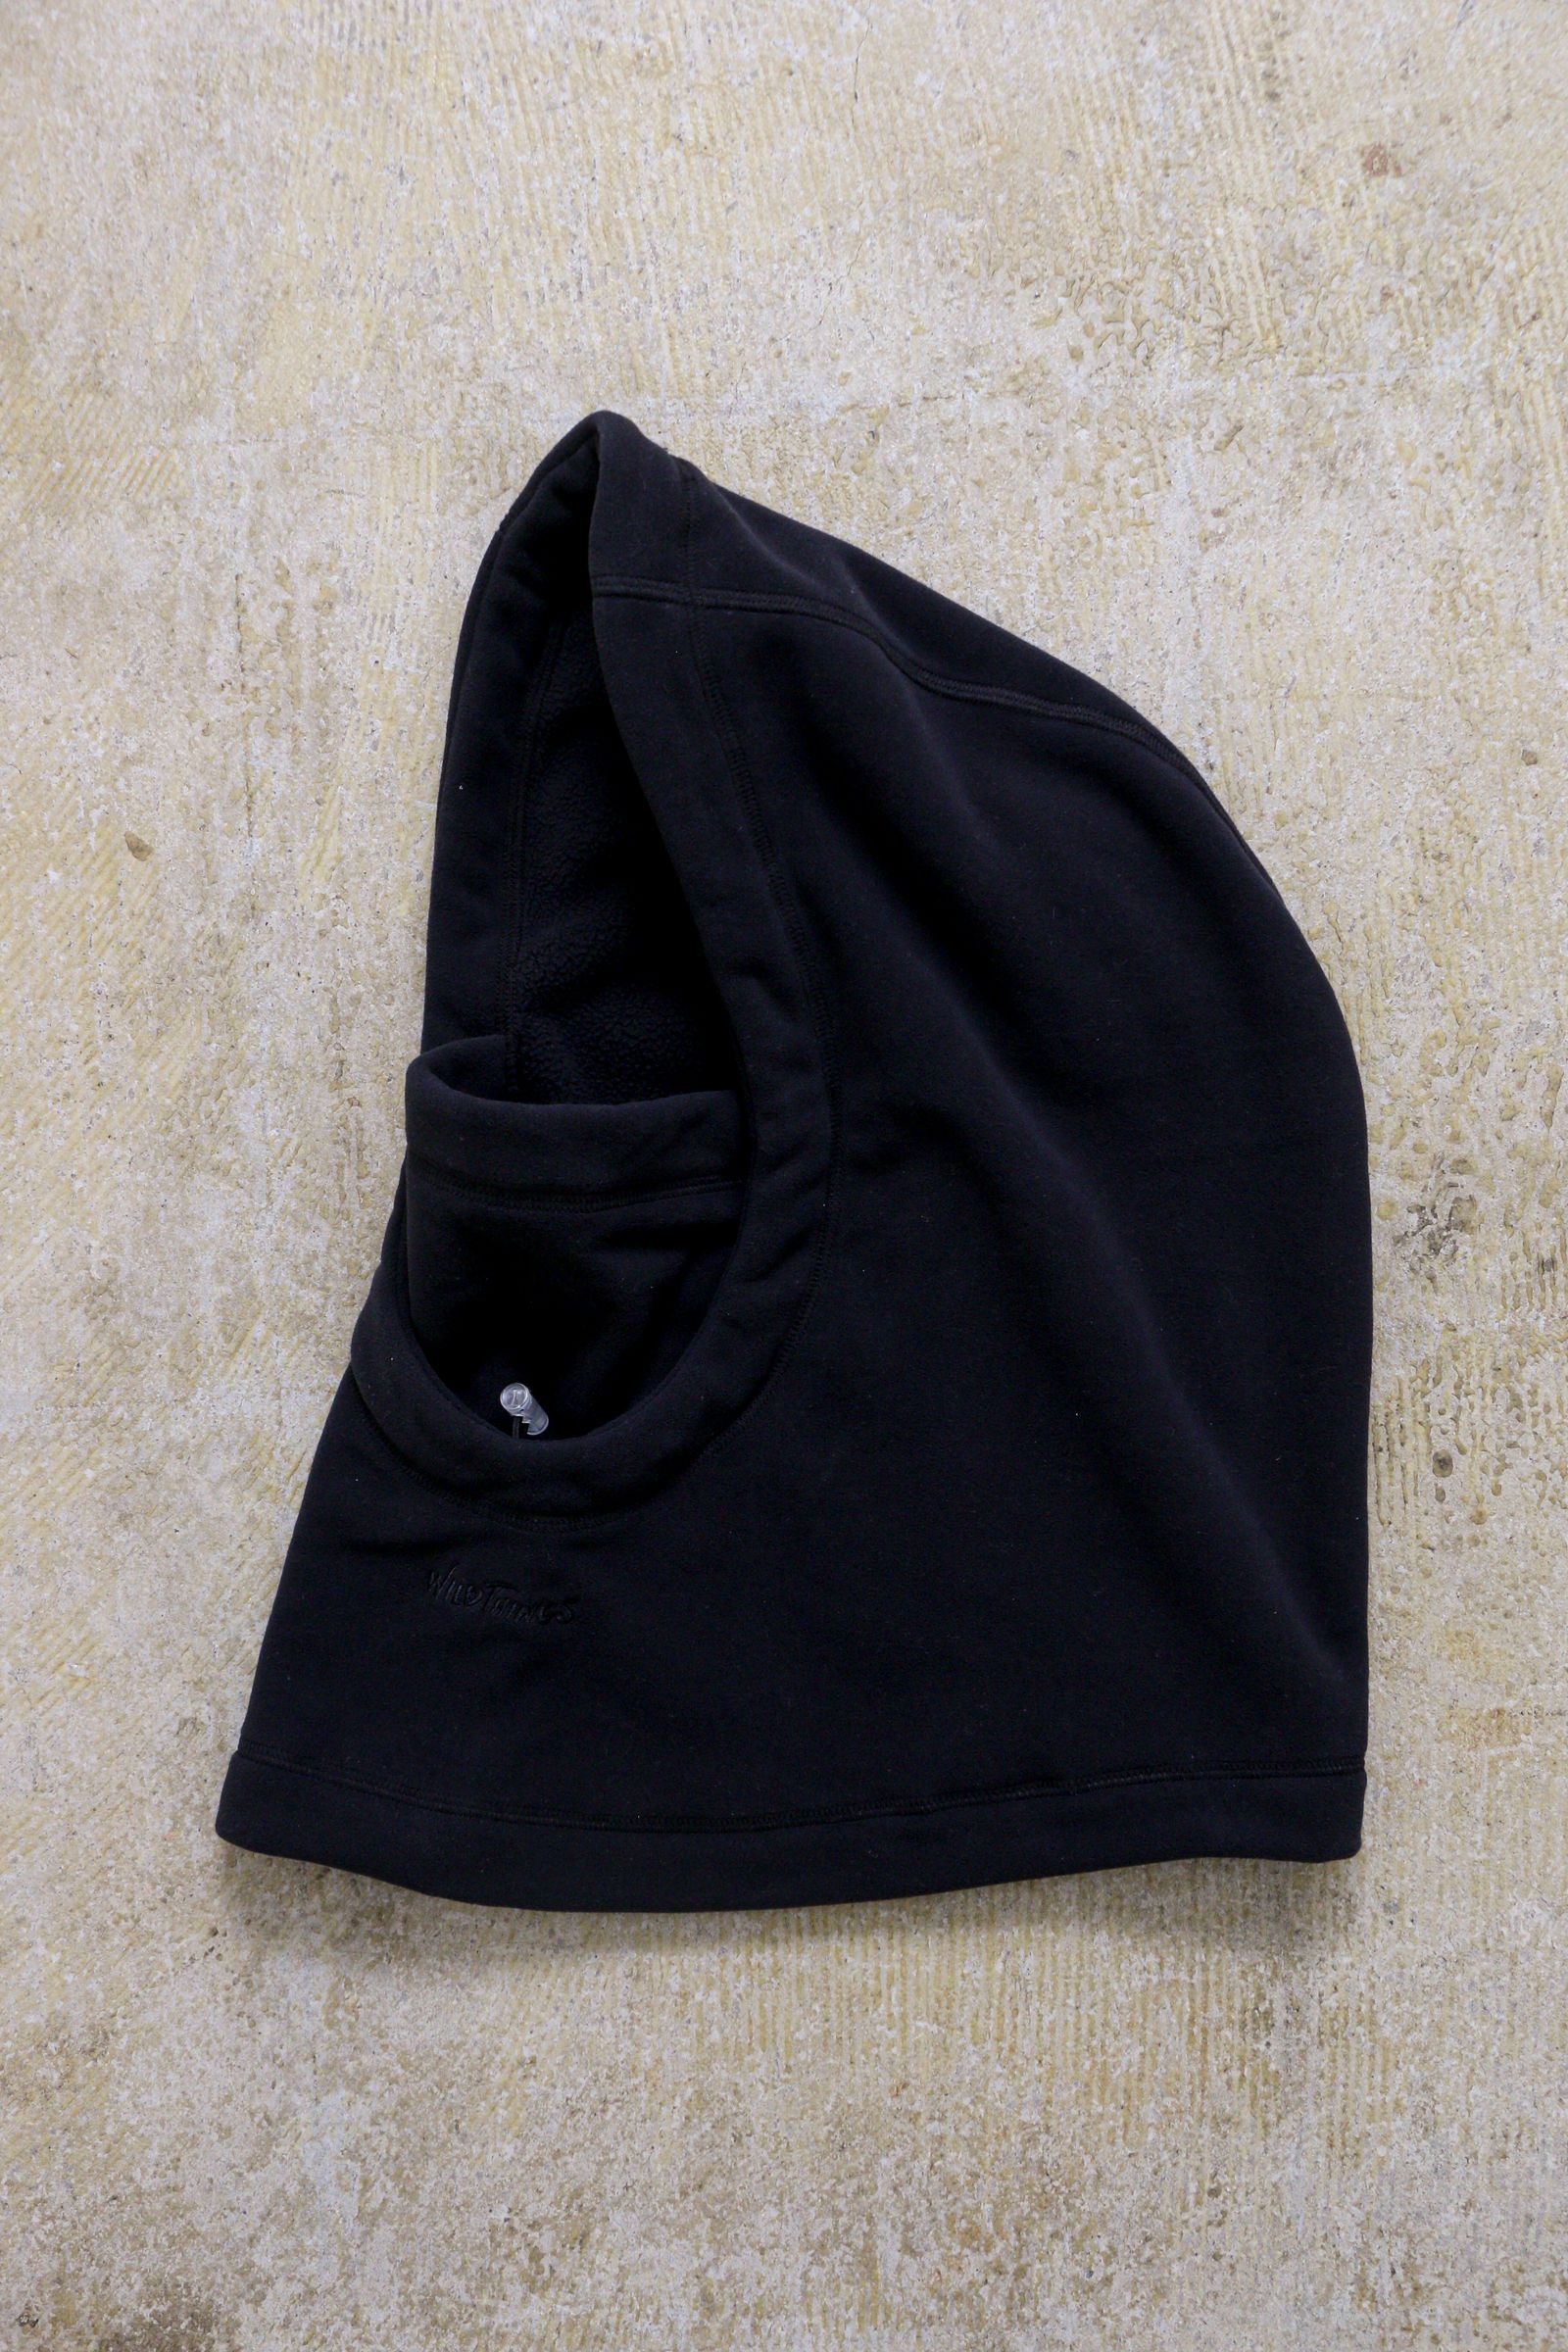 WILD THINGS - POLARTEC Wind Pro STORM HOODY / BLACK / ポーラテック